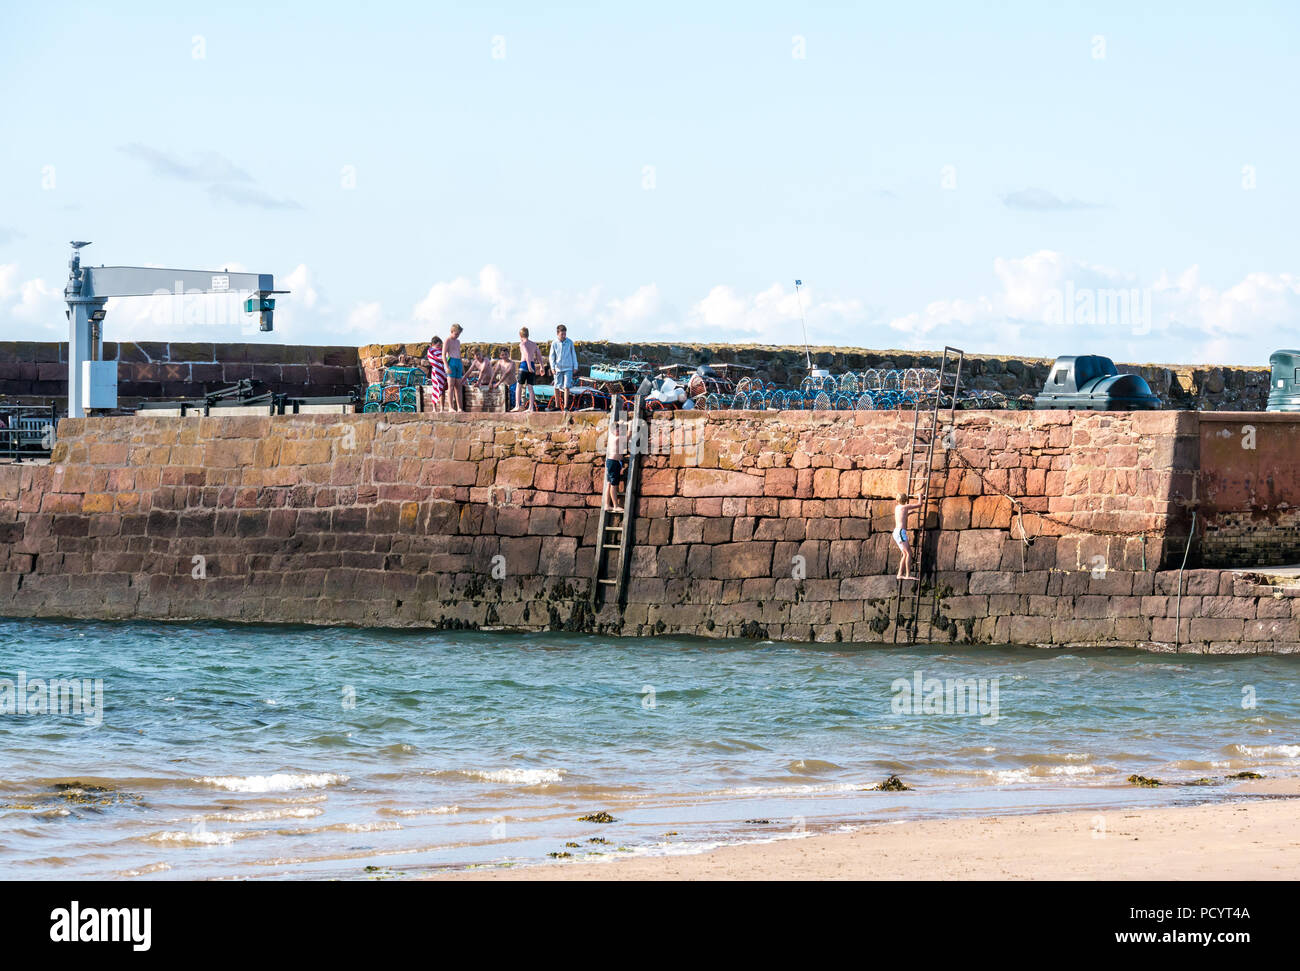 Boys climbing up harbour wall ladders after jumping into water, West bay beach, North Berwick, East Lothian, Scotland, UK in Summer heatwave Stock Photo